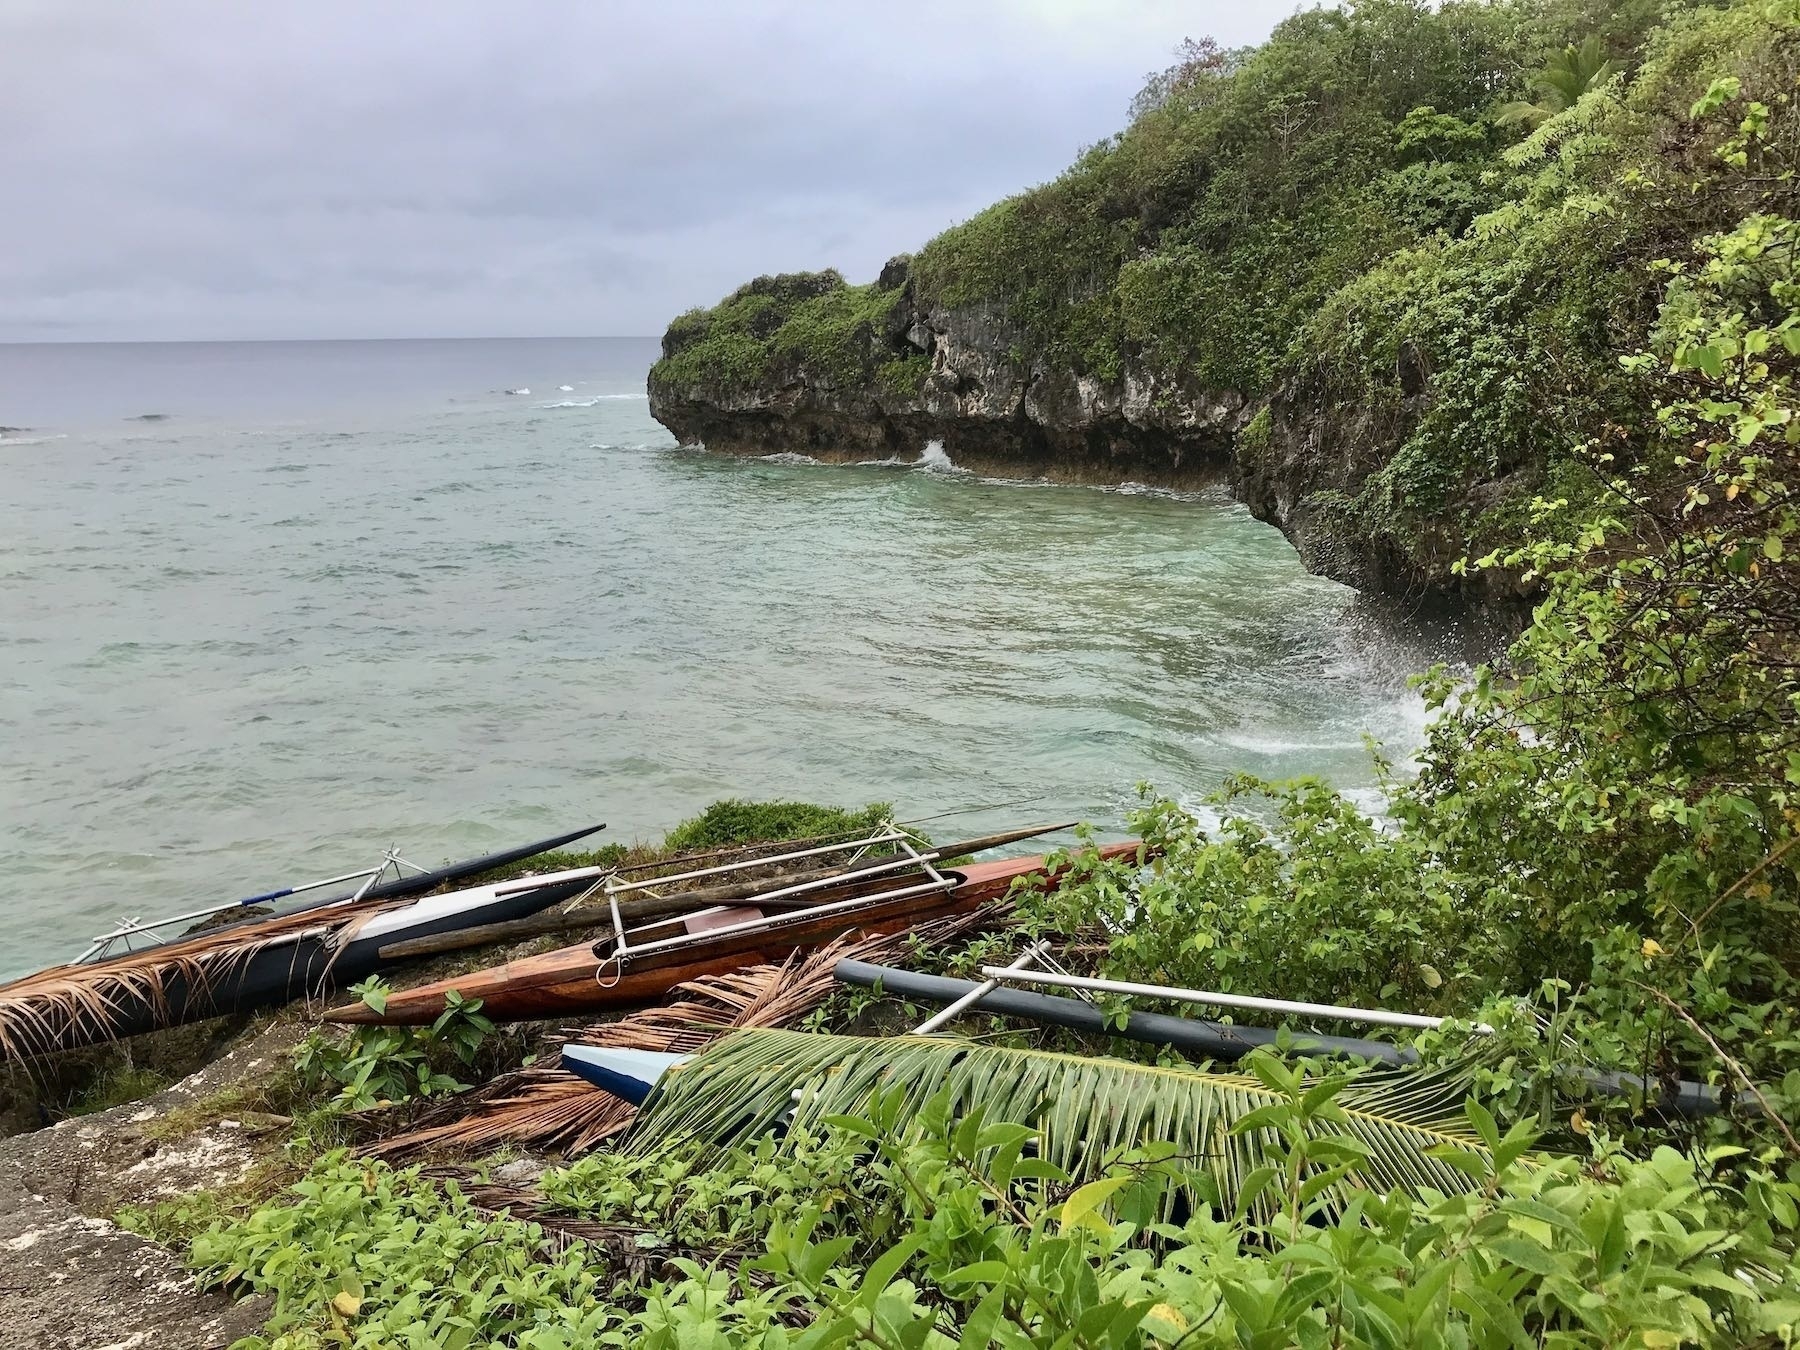 Outrigger canoes high above the water by steep rocky cliffs. 